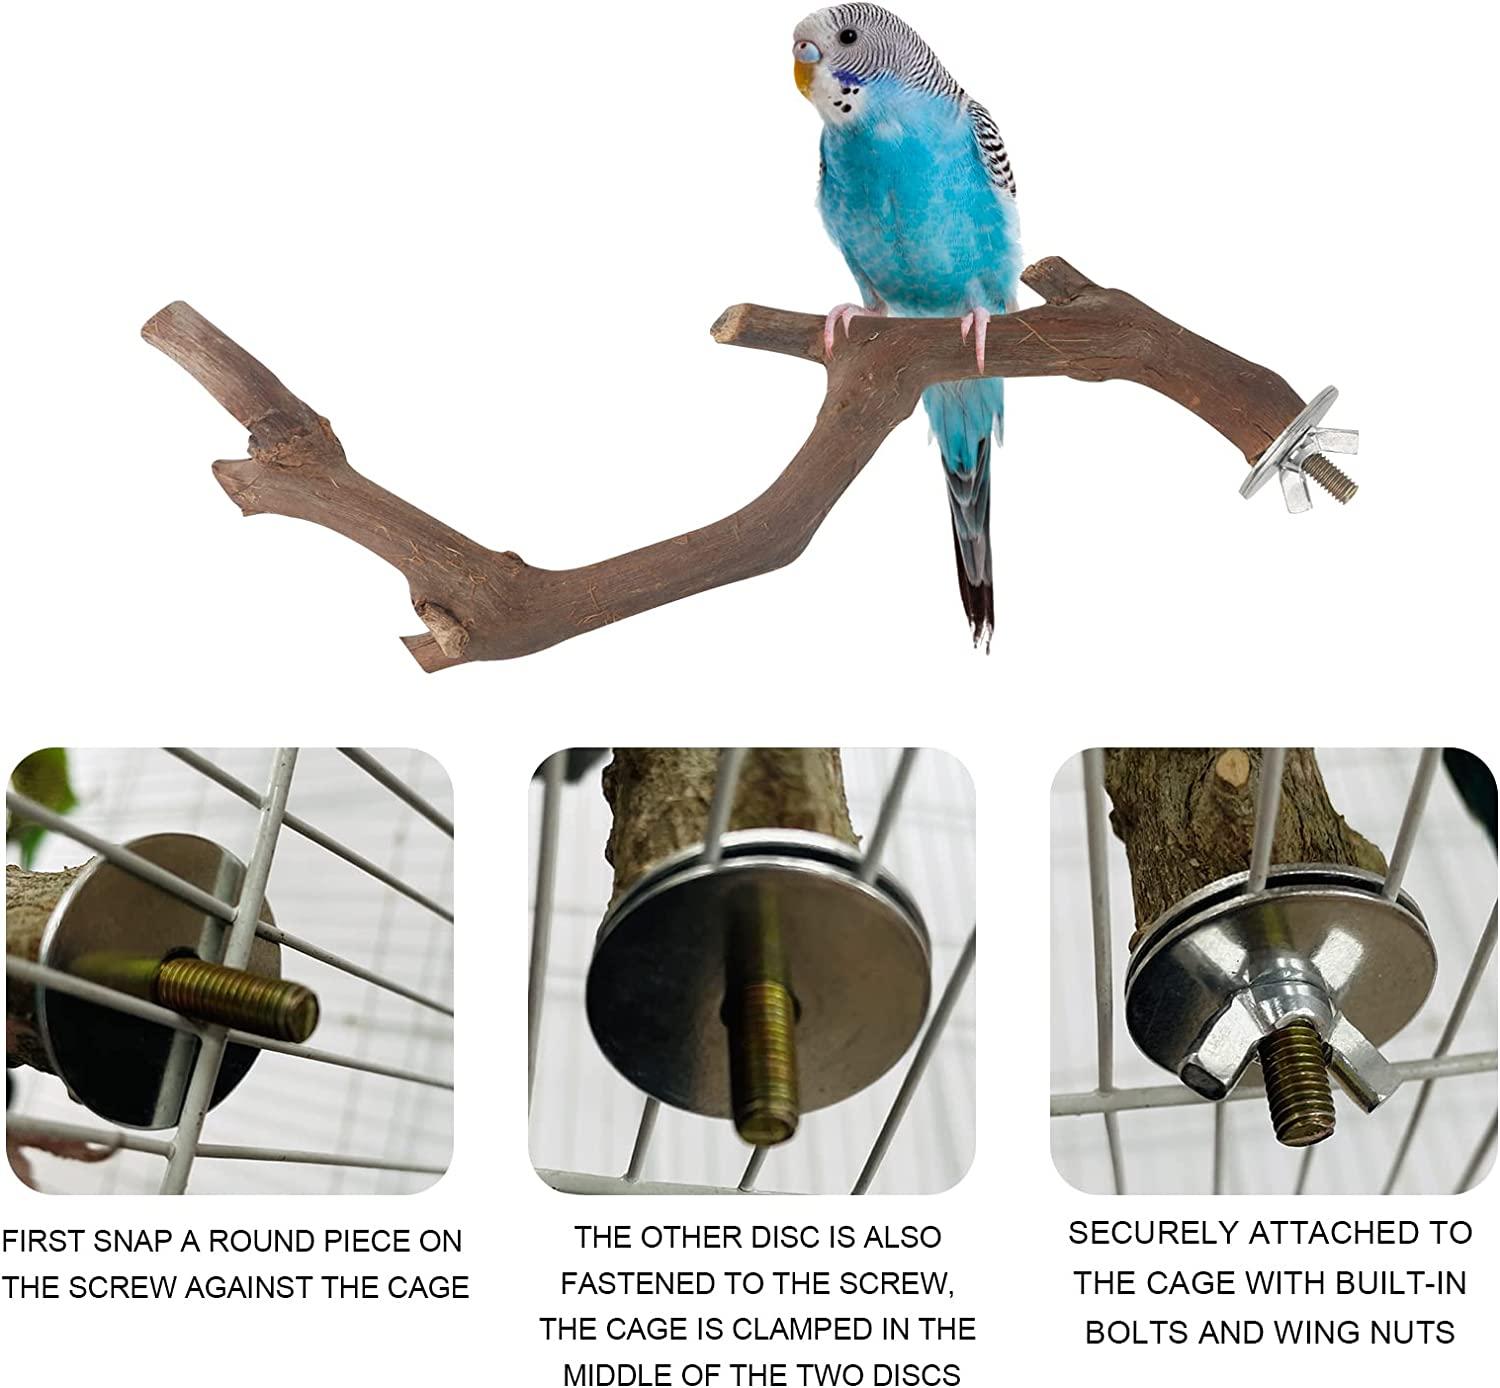 Perch Add-on for Bird Buddy Using Existing Accessory Mounting Holes My  Original Design 